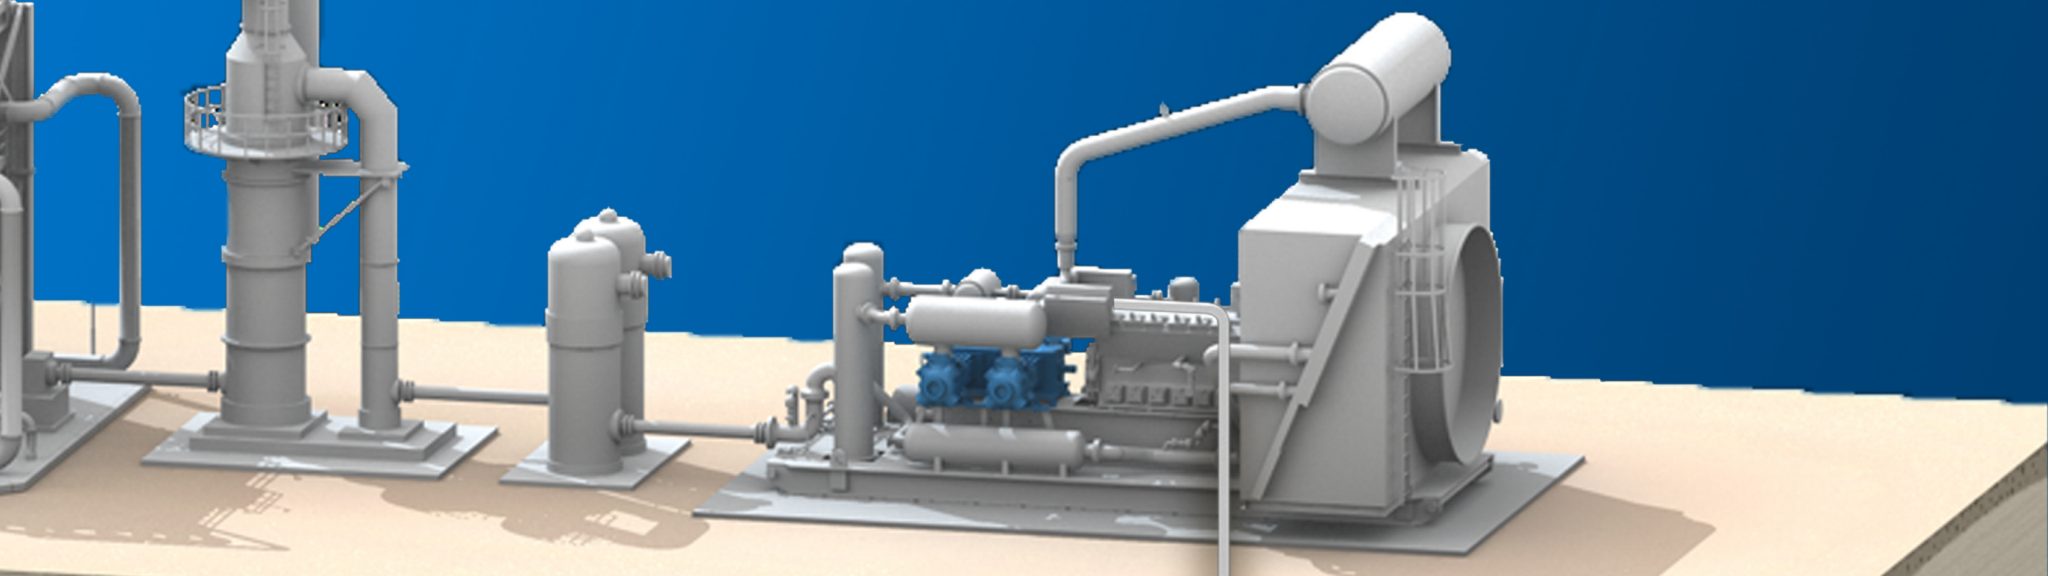 A rendering of an Acid Gas Service Unit being used to safely dispose of the corrosive, acidic mixture